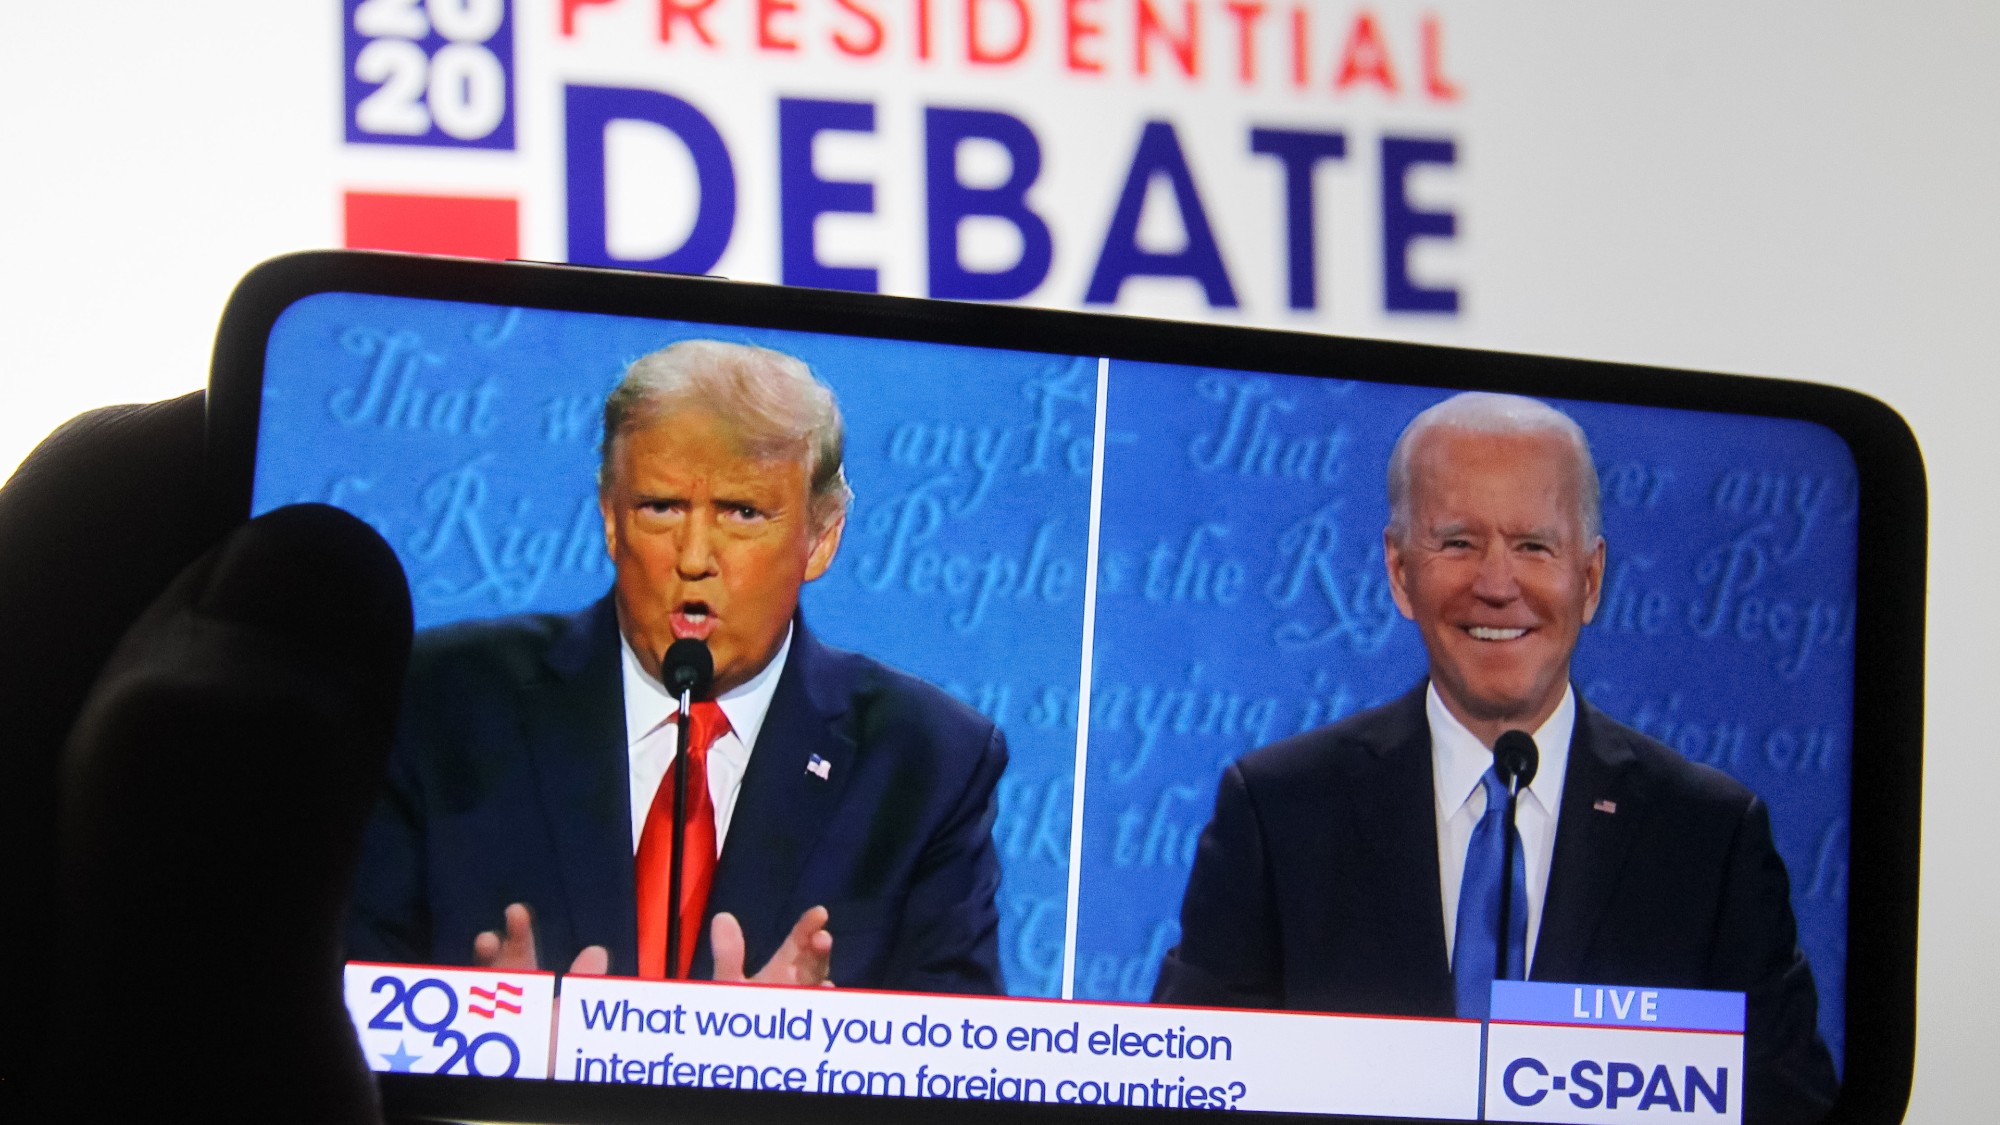  'Presidential debates are more performance art than actual ways to inform' 